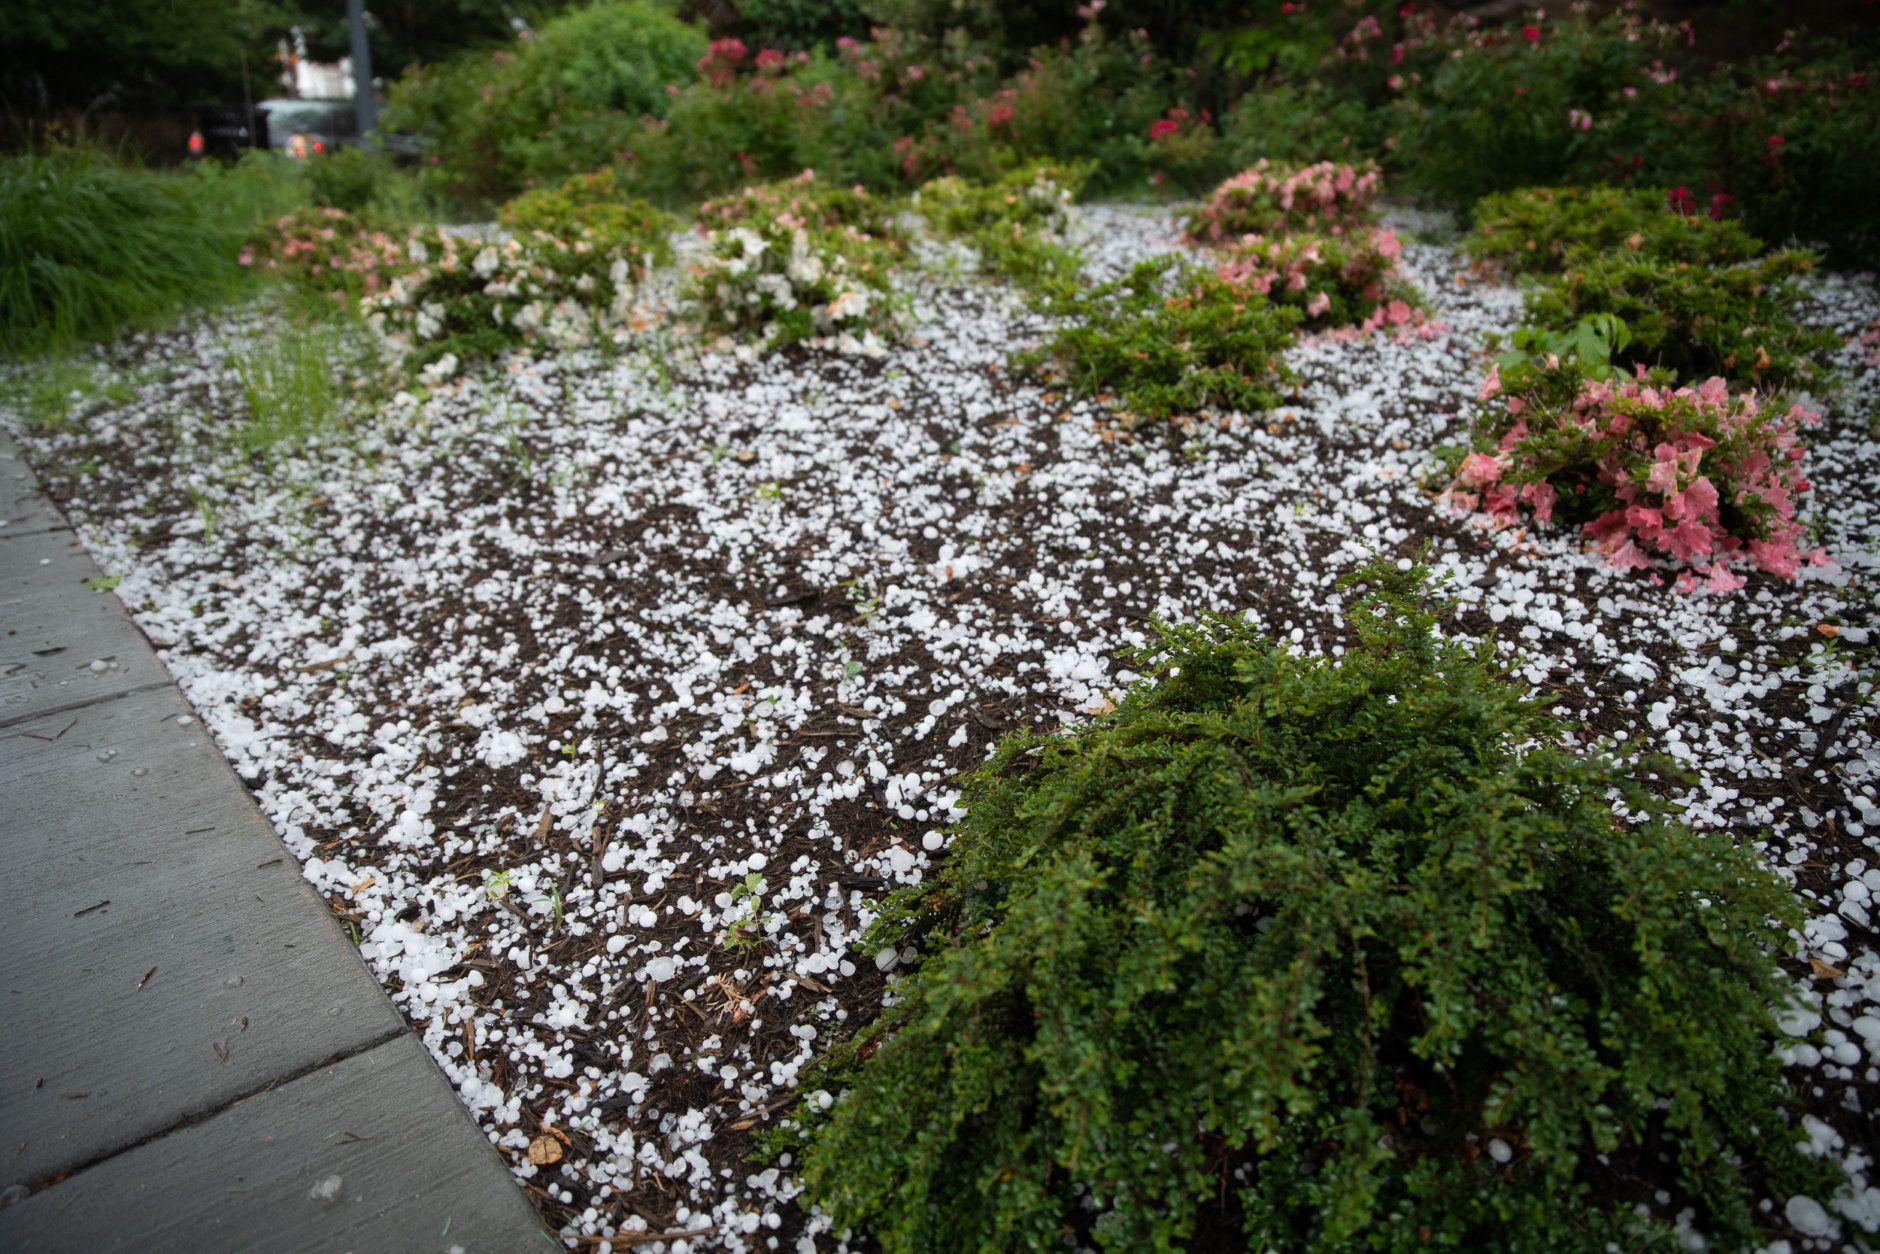 Pea to quarter-sized hail fell in Northwest D.C. on Sunday afternoon near the National Zoo for several minutes, coating roadways and damaging plants. (WTOP/Alejandro Alvarez)